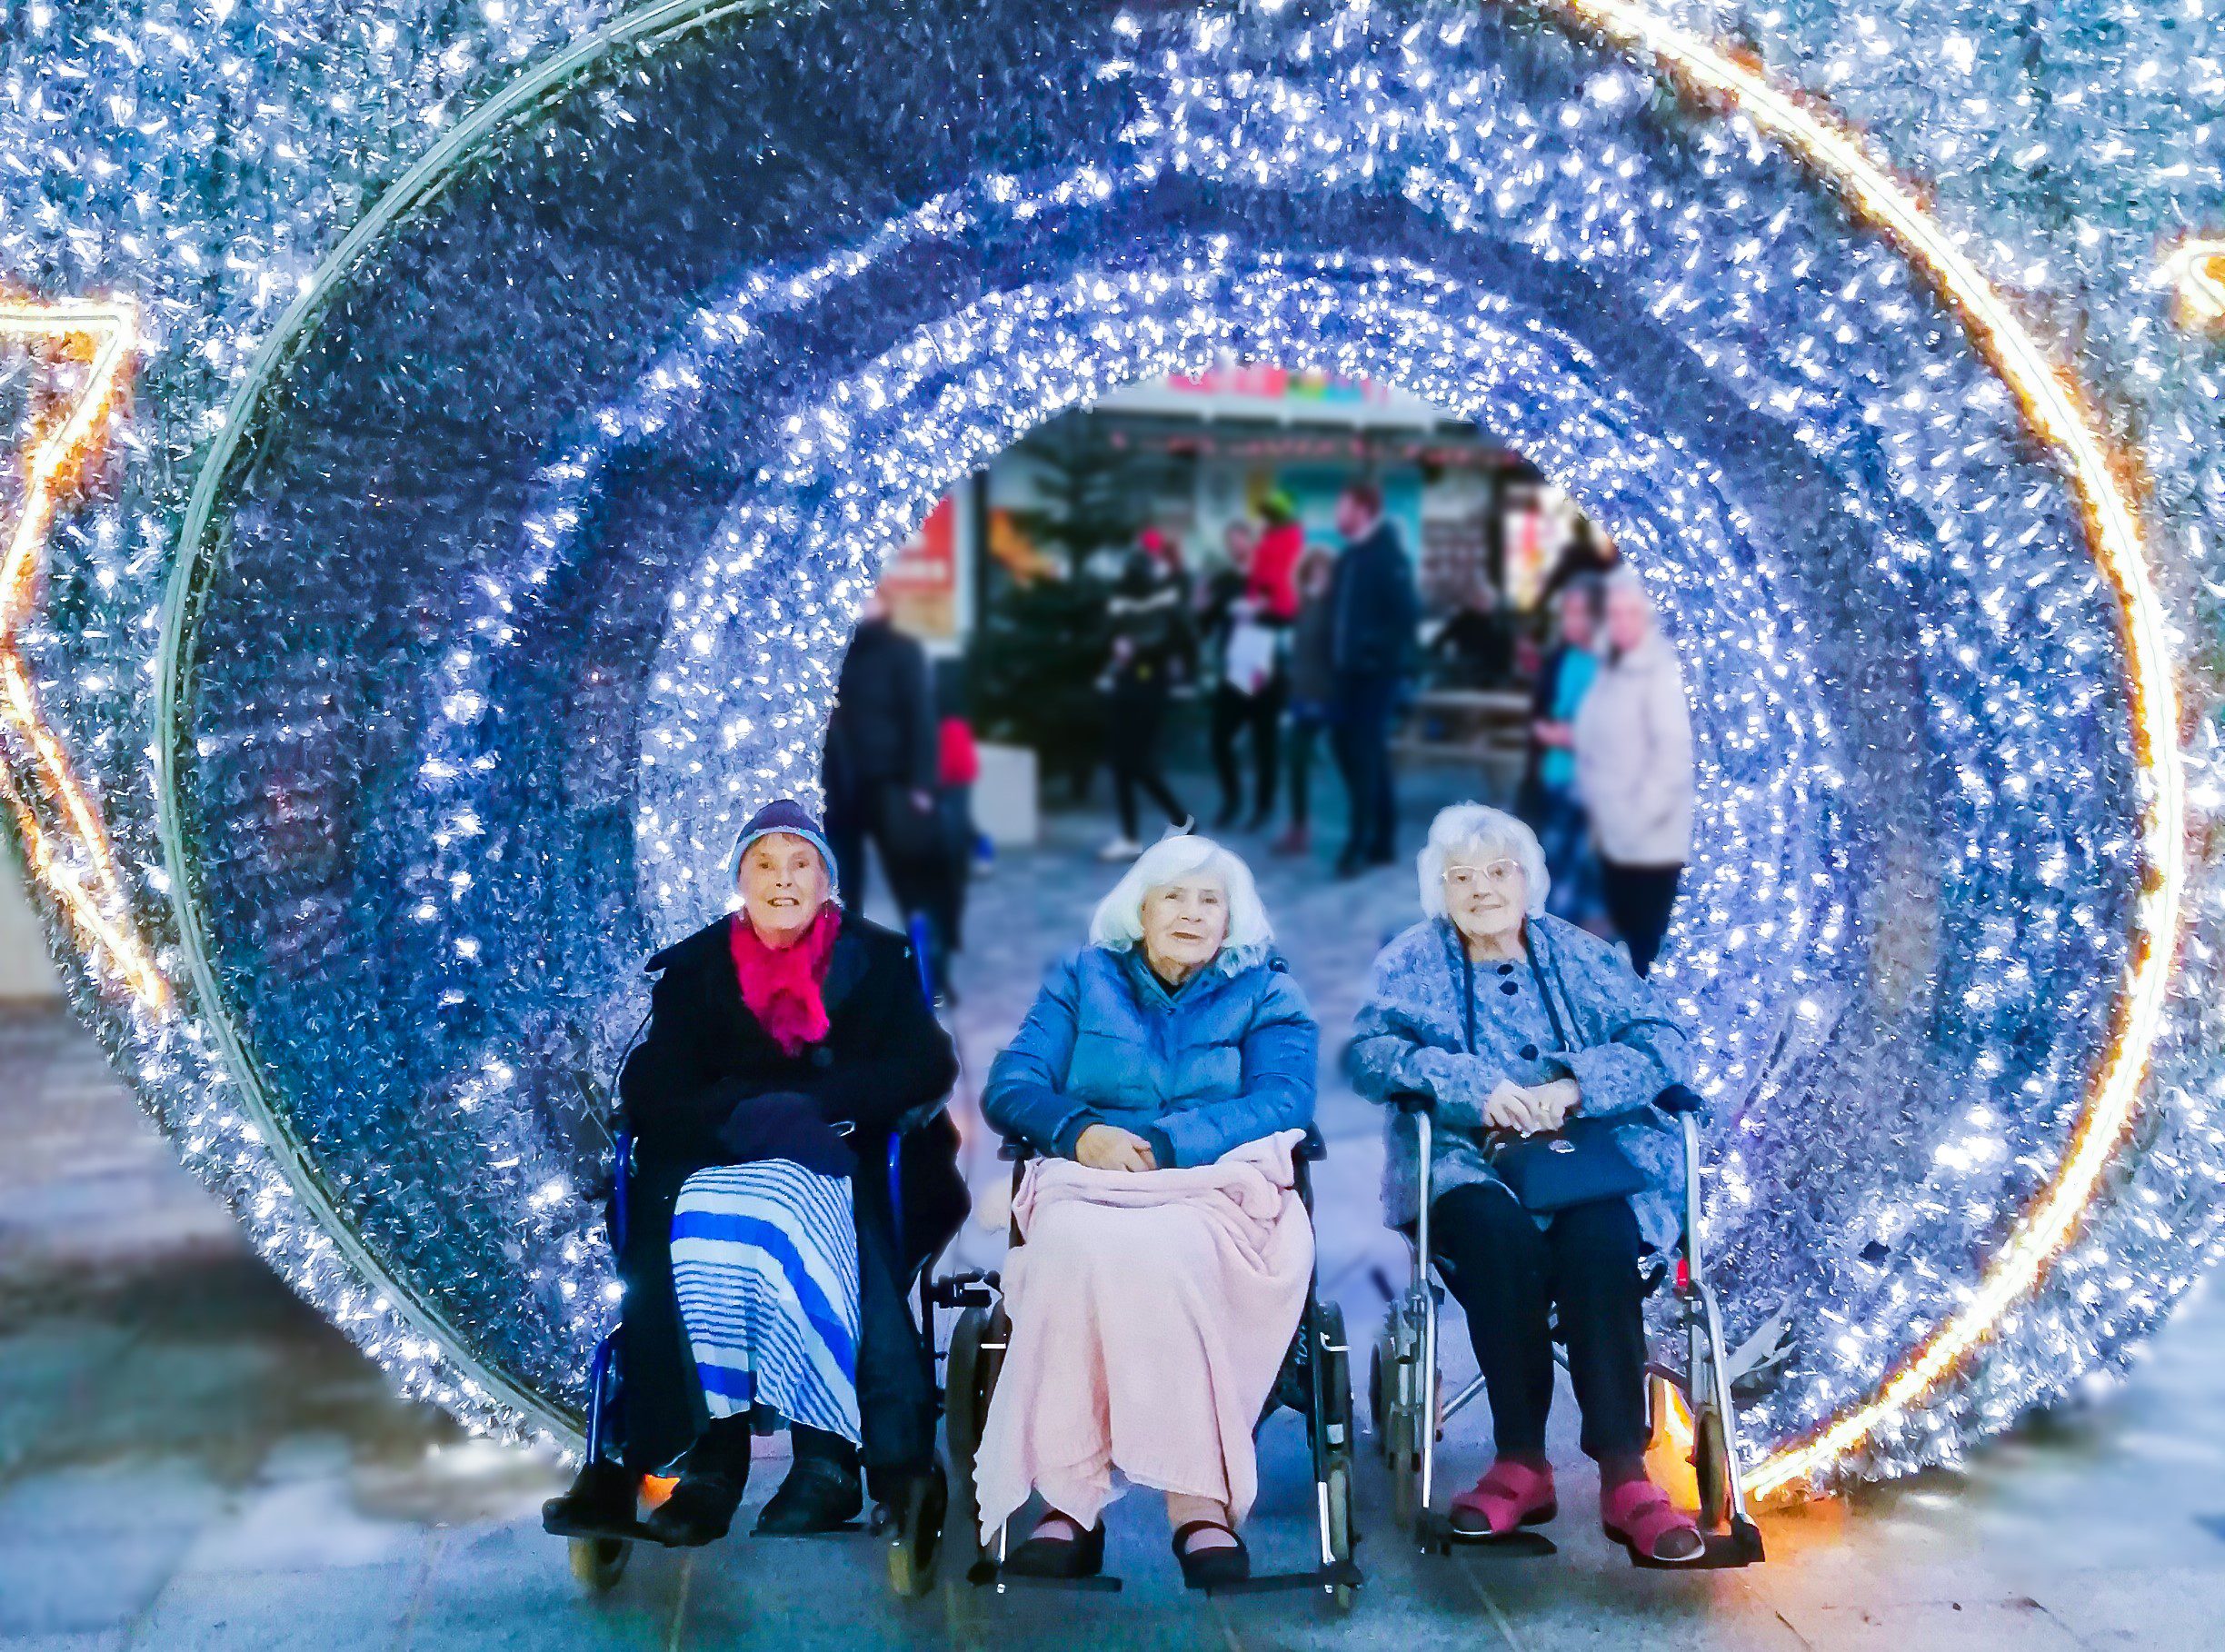 RNNH Care Home residents at the Winter Wonderland